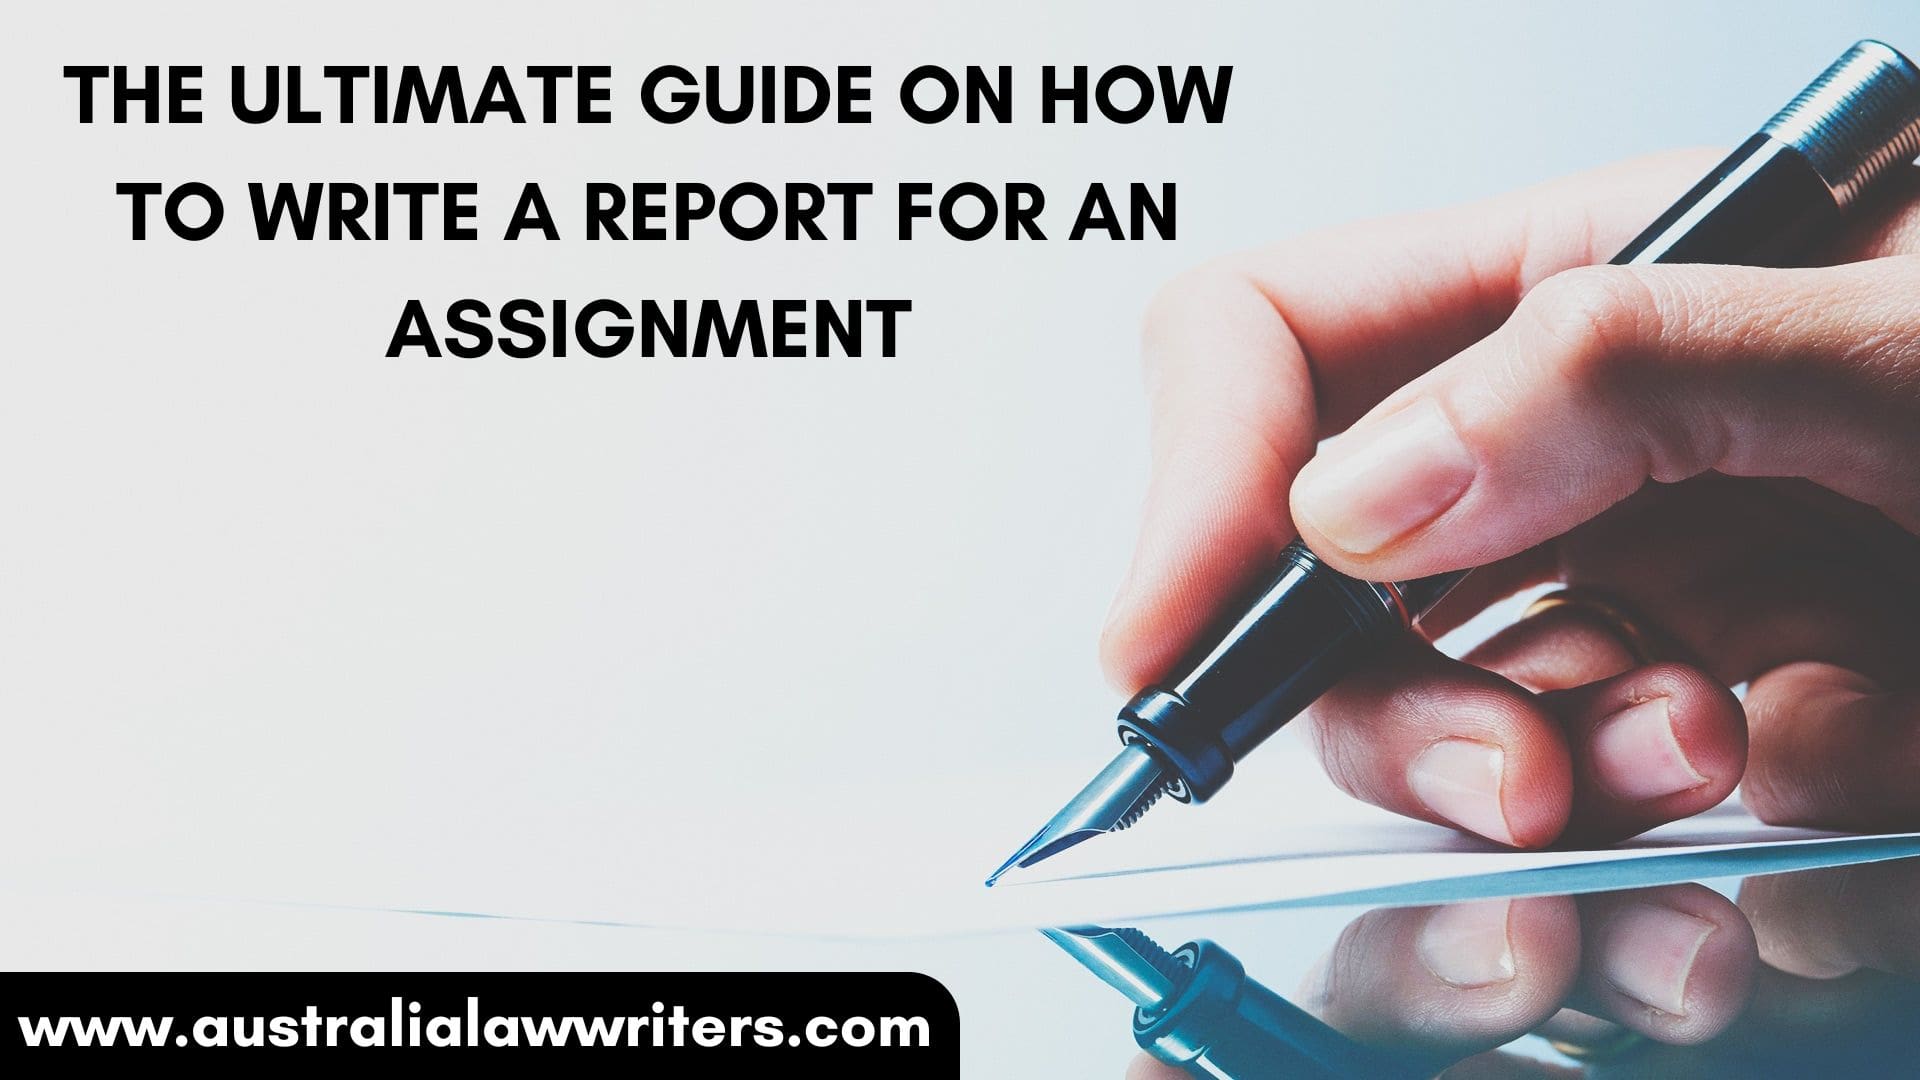 THE ULTIMATE GUIDE ON HOW TO WRITE A REPORT FOR AN ASSIGNMENT